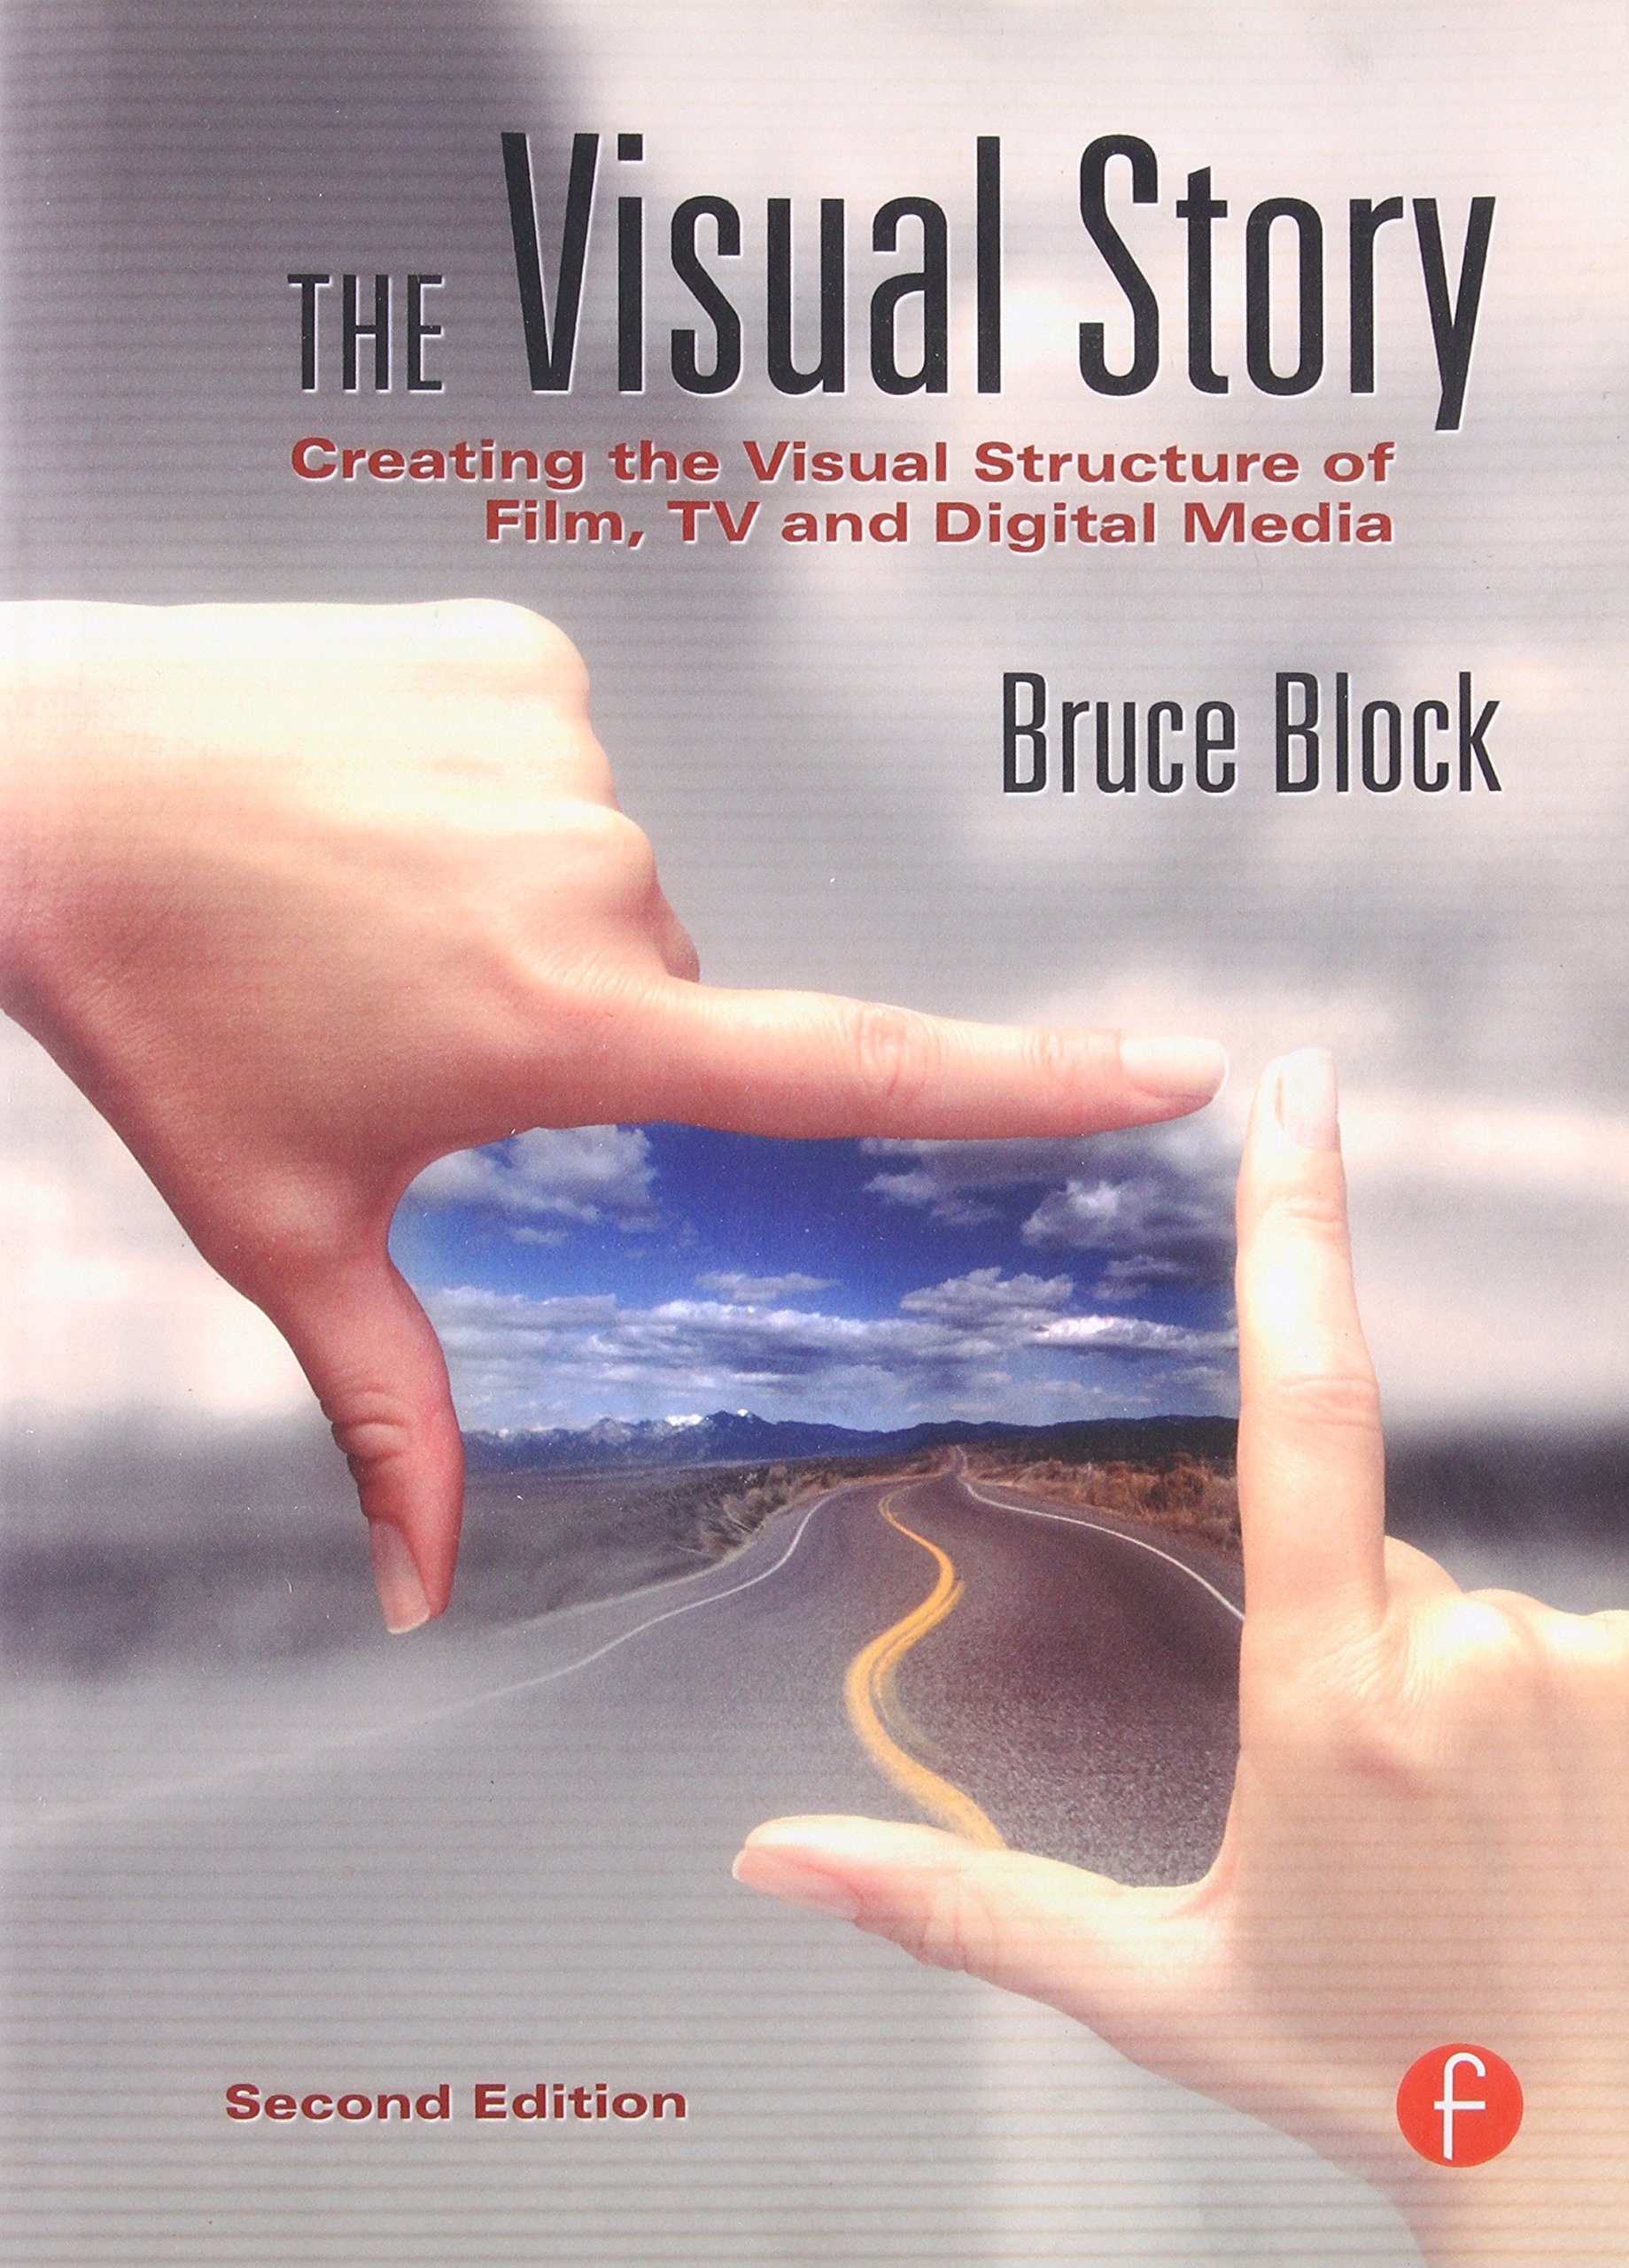 The visual story